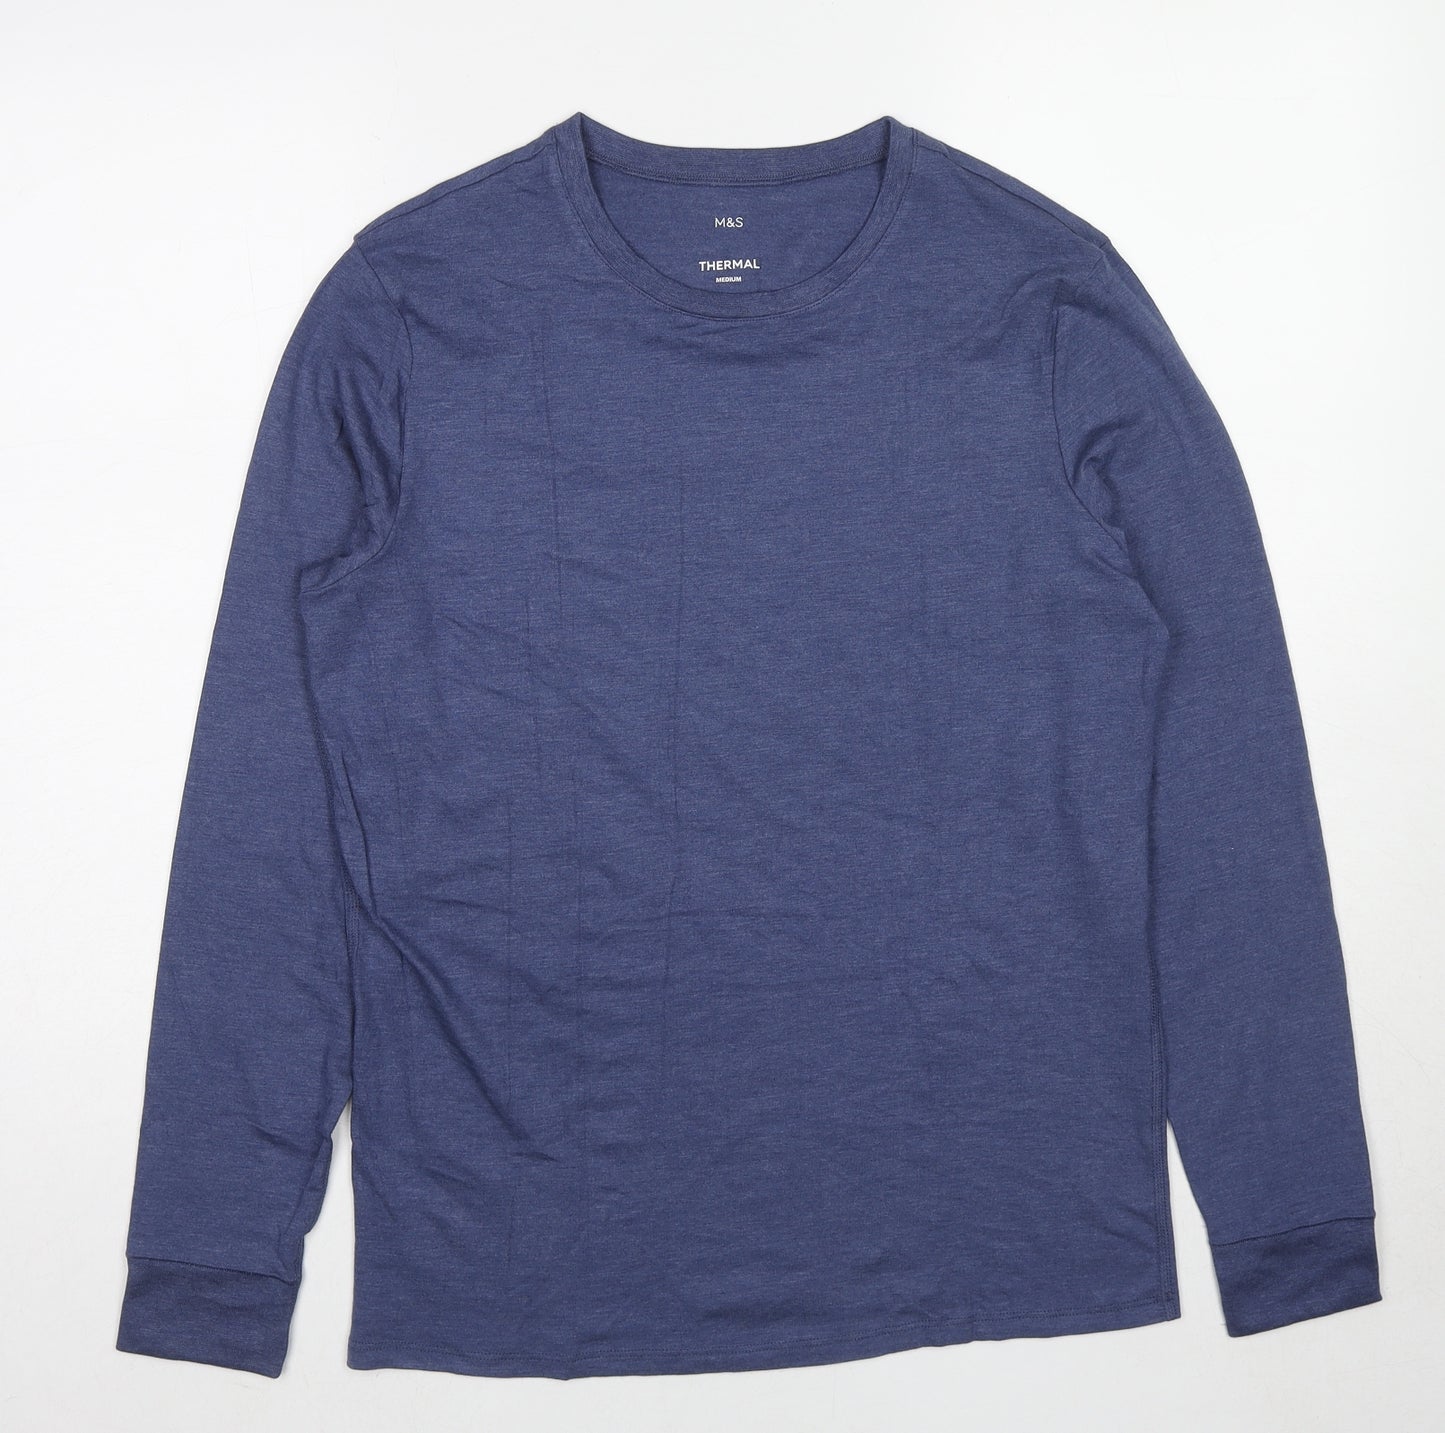 Marks and Spencer Mens Blue Acrylic T-Shirt Size M Crew Neck - Thermal